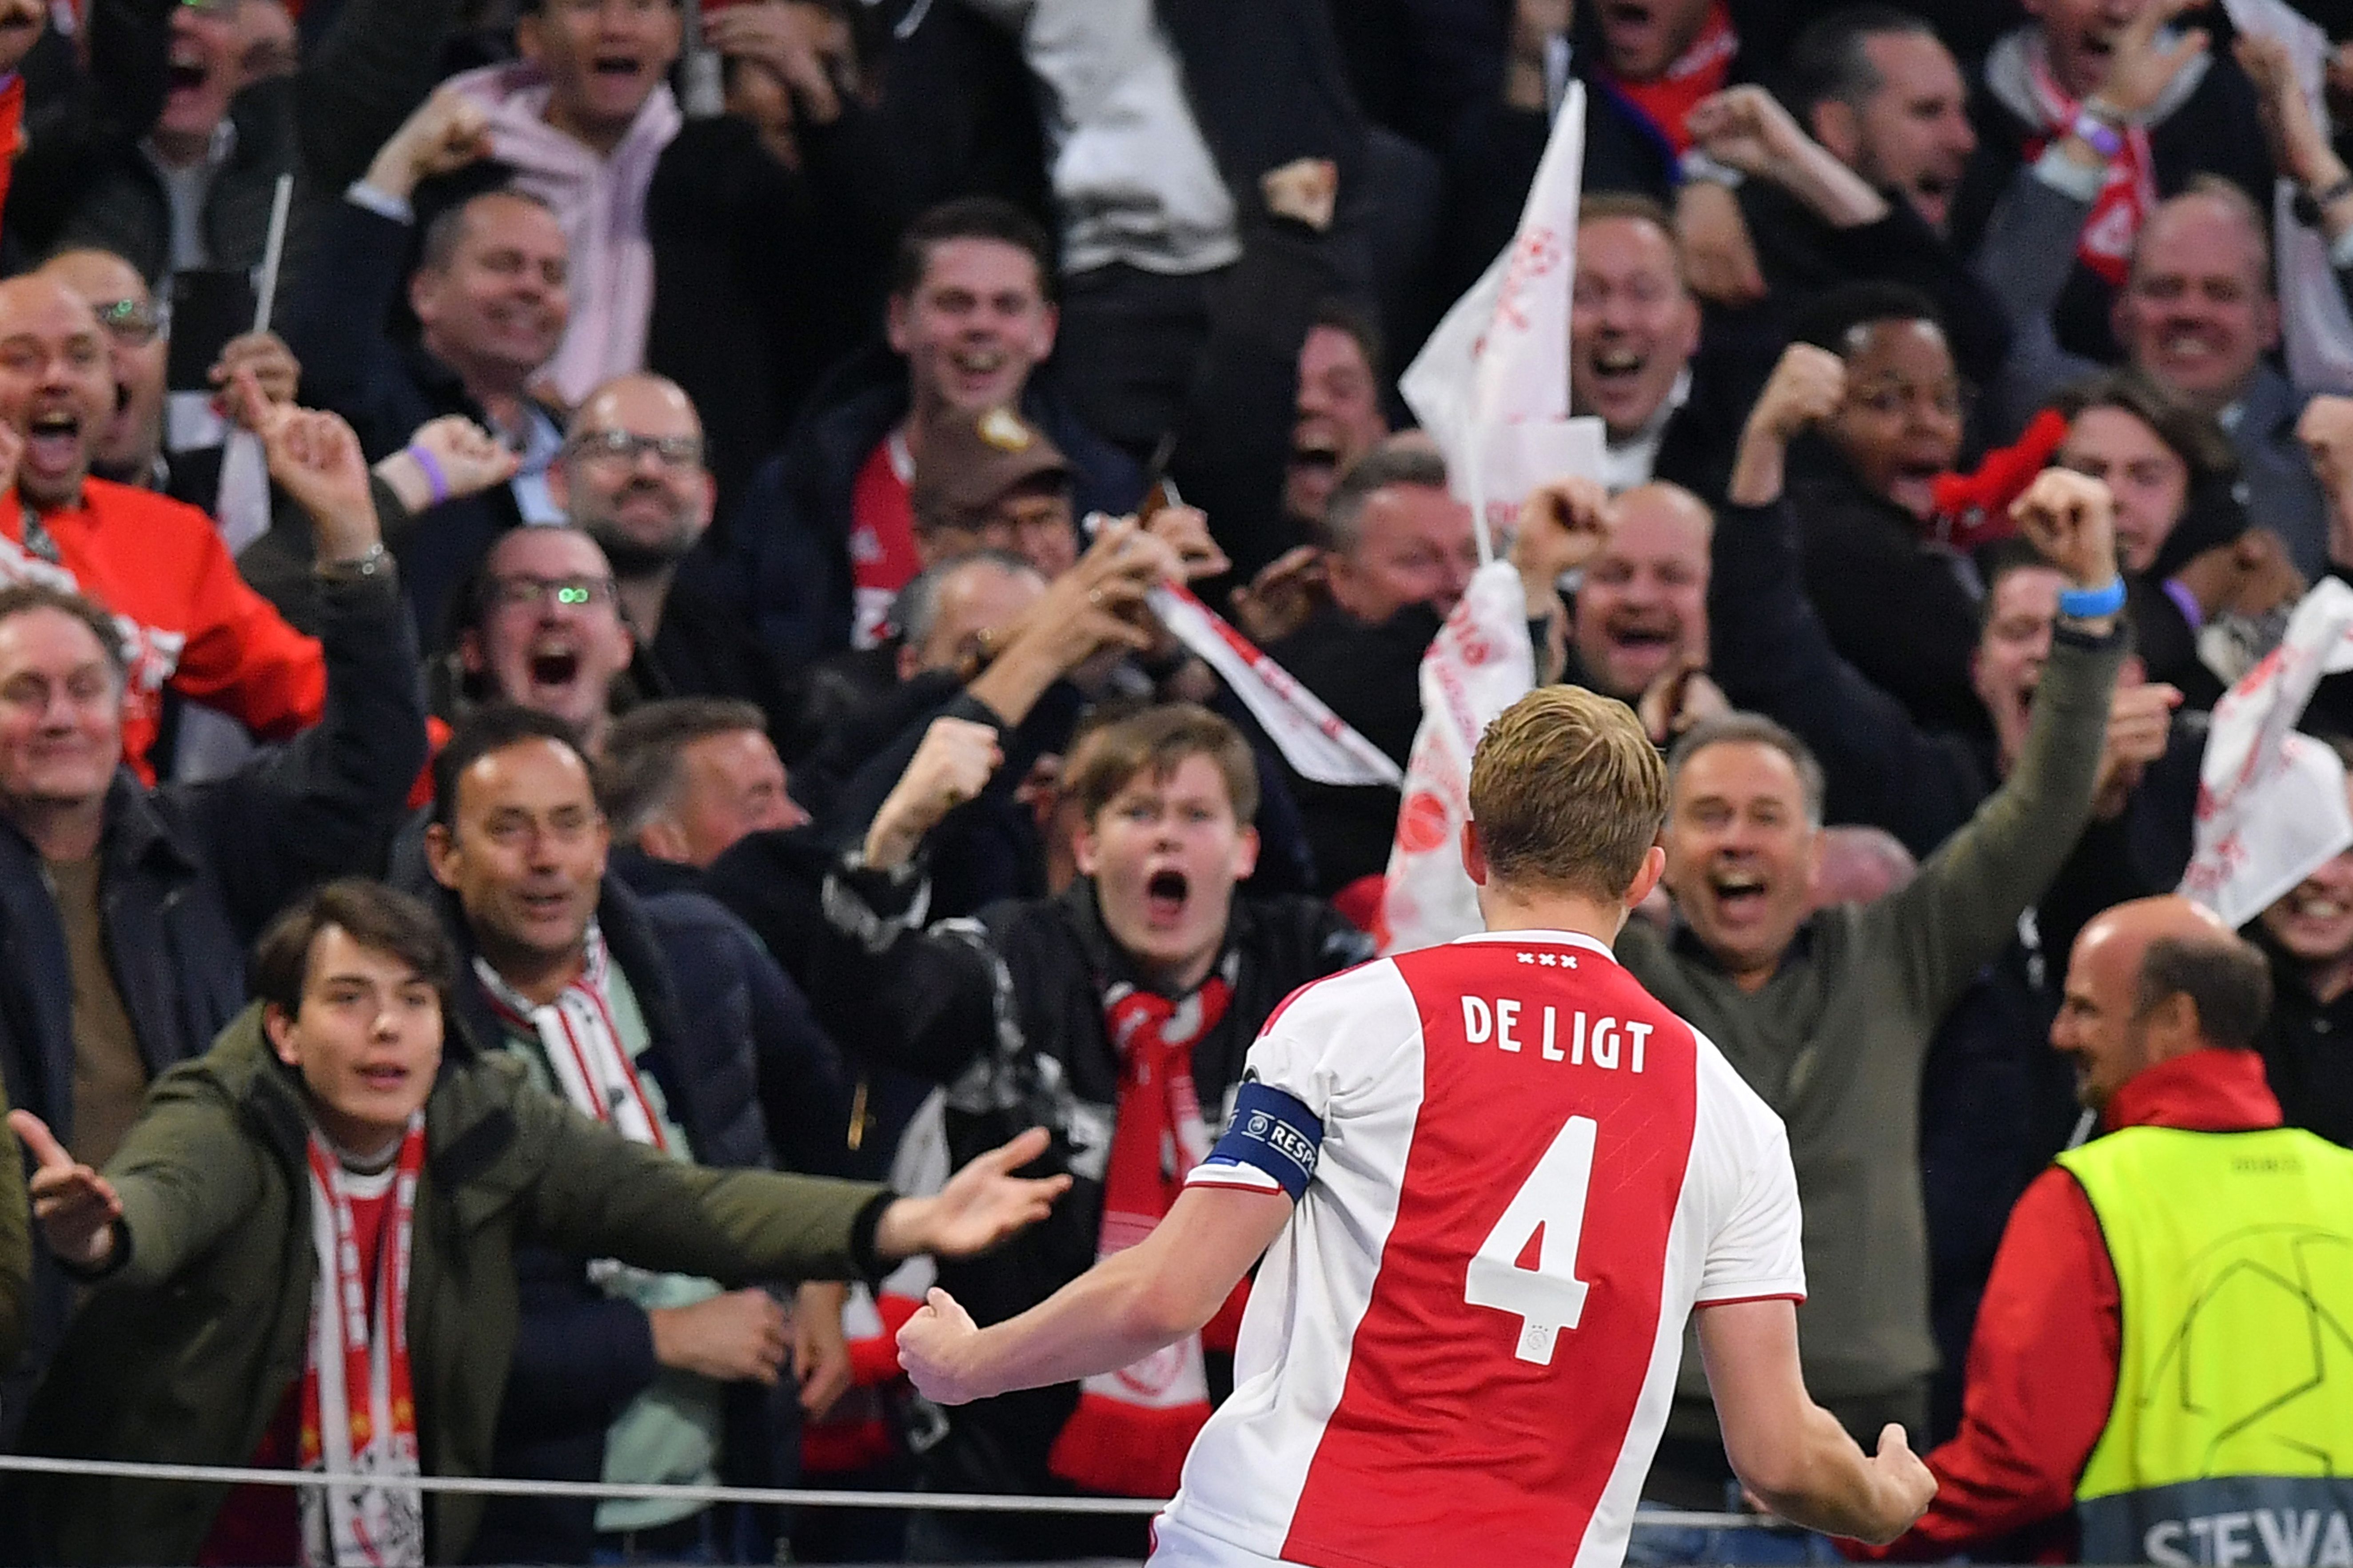 Ajax's Dutch defender Matthijs de Ligt celebrates after scoring the first goal during the UEFA Champions League semi-final second leg football match between Ajax Amsterdam and Tottenham Hotspur at the Johan Cruyff Arena, in Amsterdam, on May 8, 2019. (Photo by EMMANUEL DUNAND / AFP)        (Photo credit should read EMMANUEL DUNAND/AFP/Getty Images)